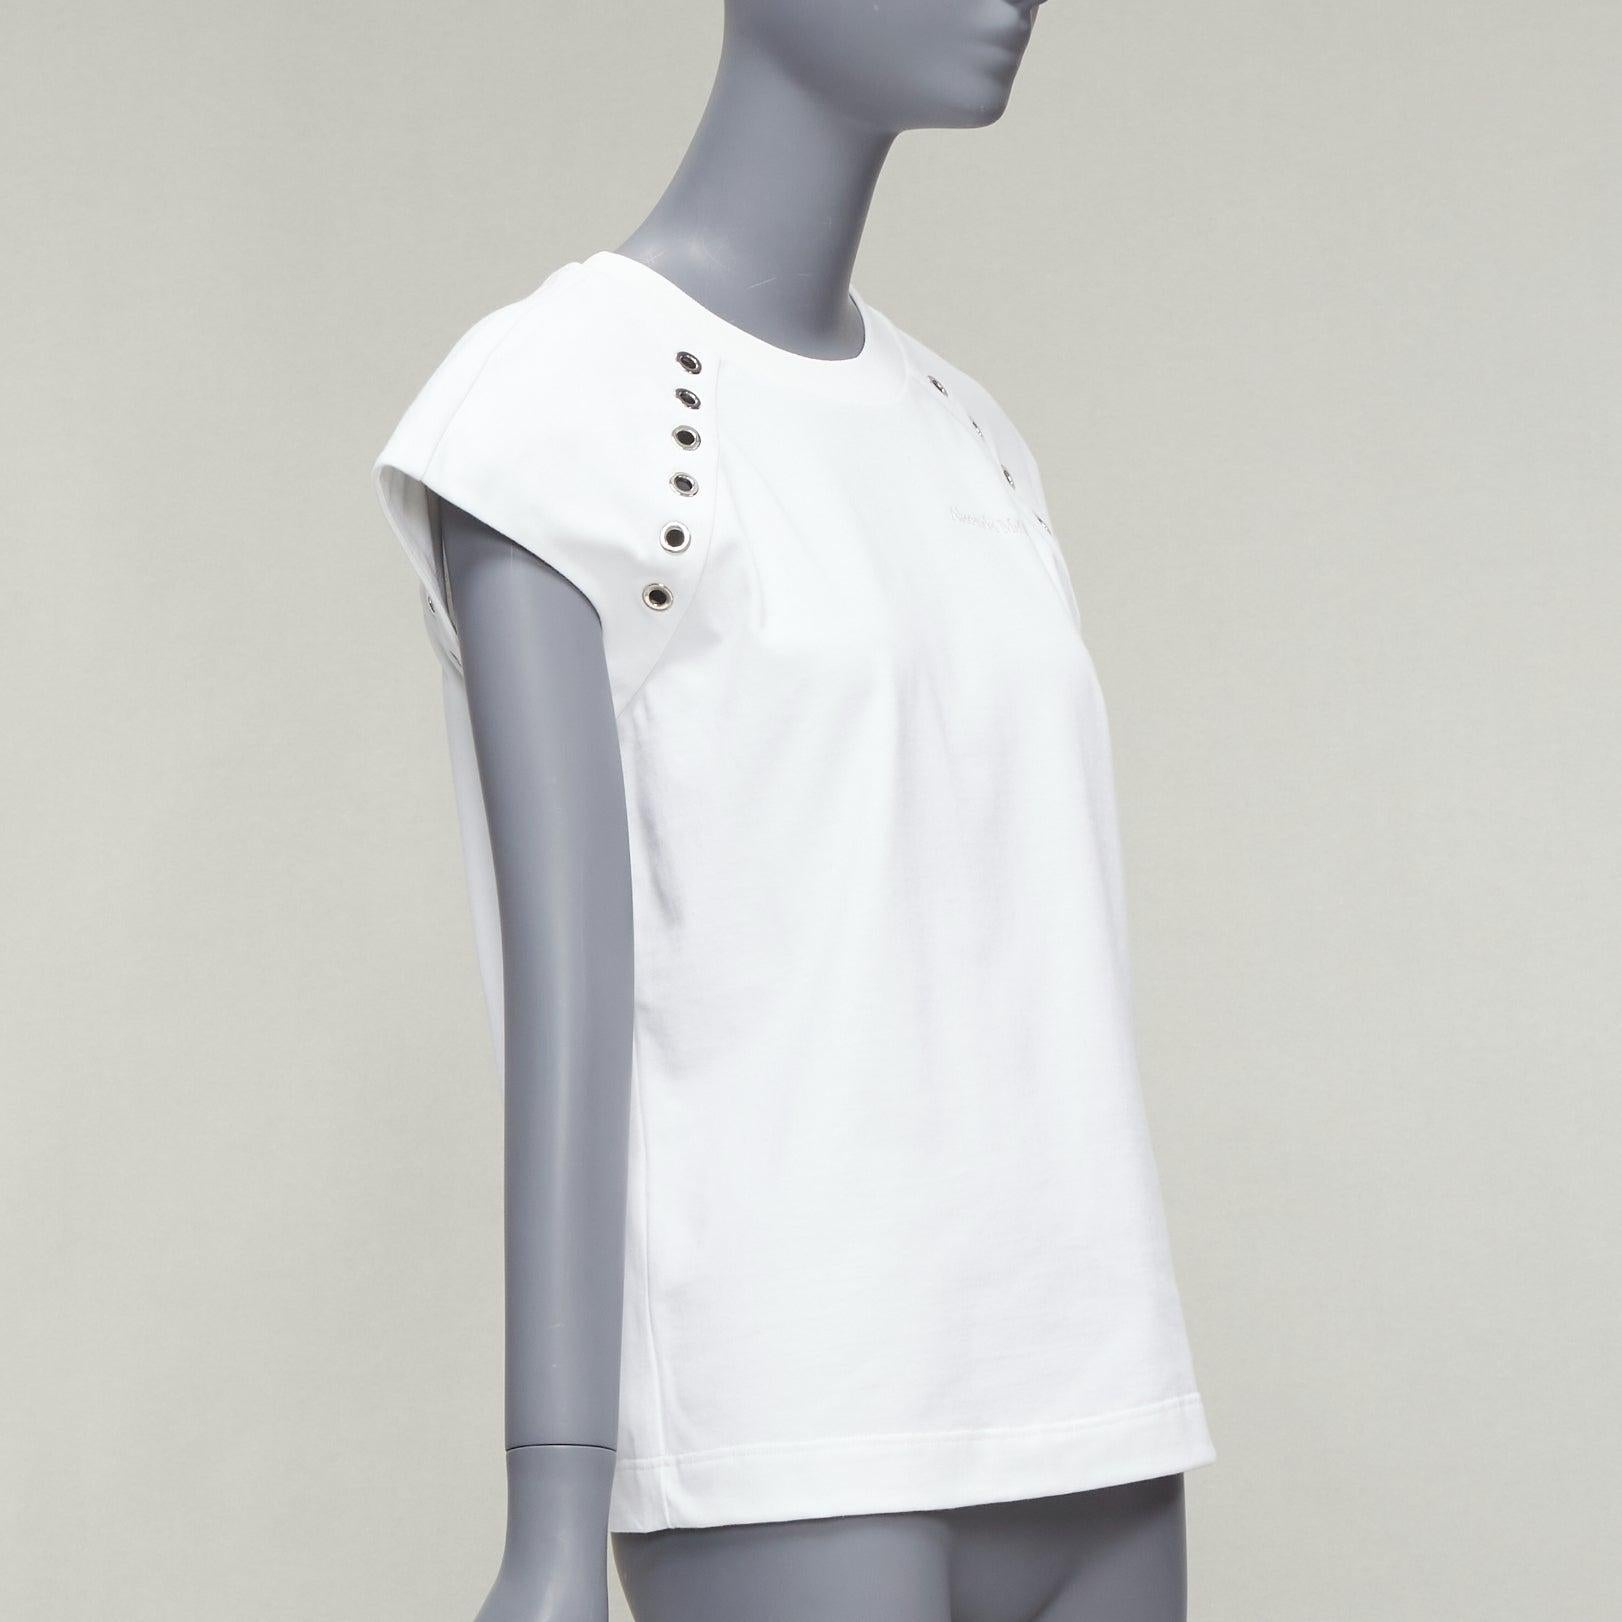 ALEXANDER MCQUEEN white cotton eyelet detail studded cap sleeve top IT38 XS
Reference: AAWC/A00668
Brand: Alexander McQueen
Designer: Sarah Burton
Collection: 2022
Material: Cotton, Metal
Color: White, Silver
Pattern: Solid
Closure: Slip On
Extra